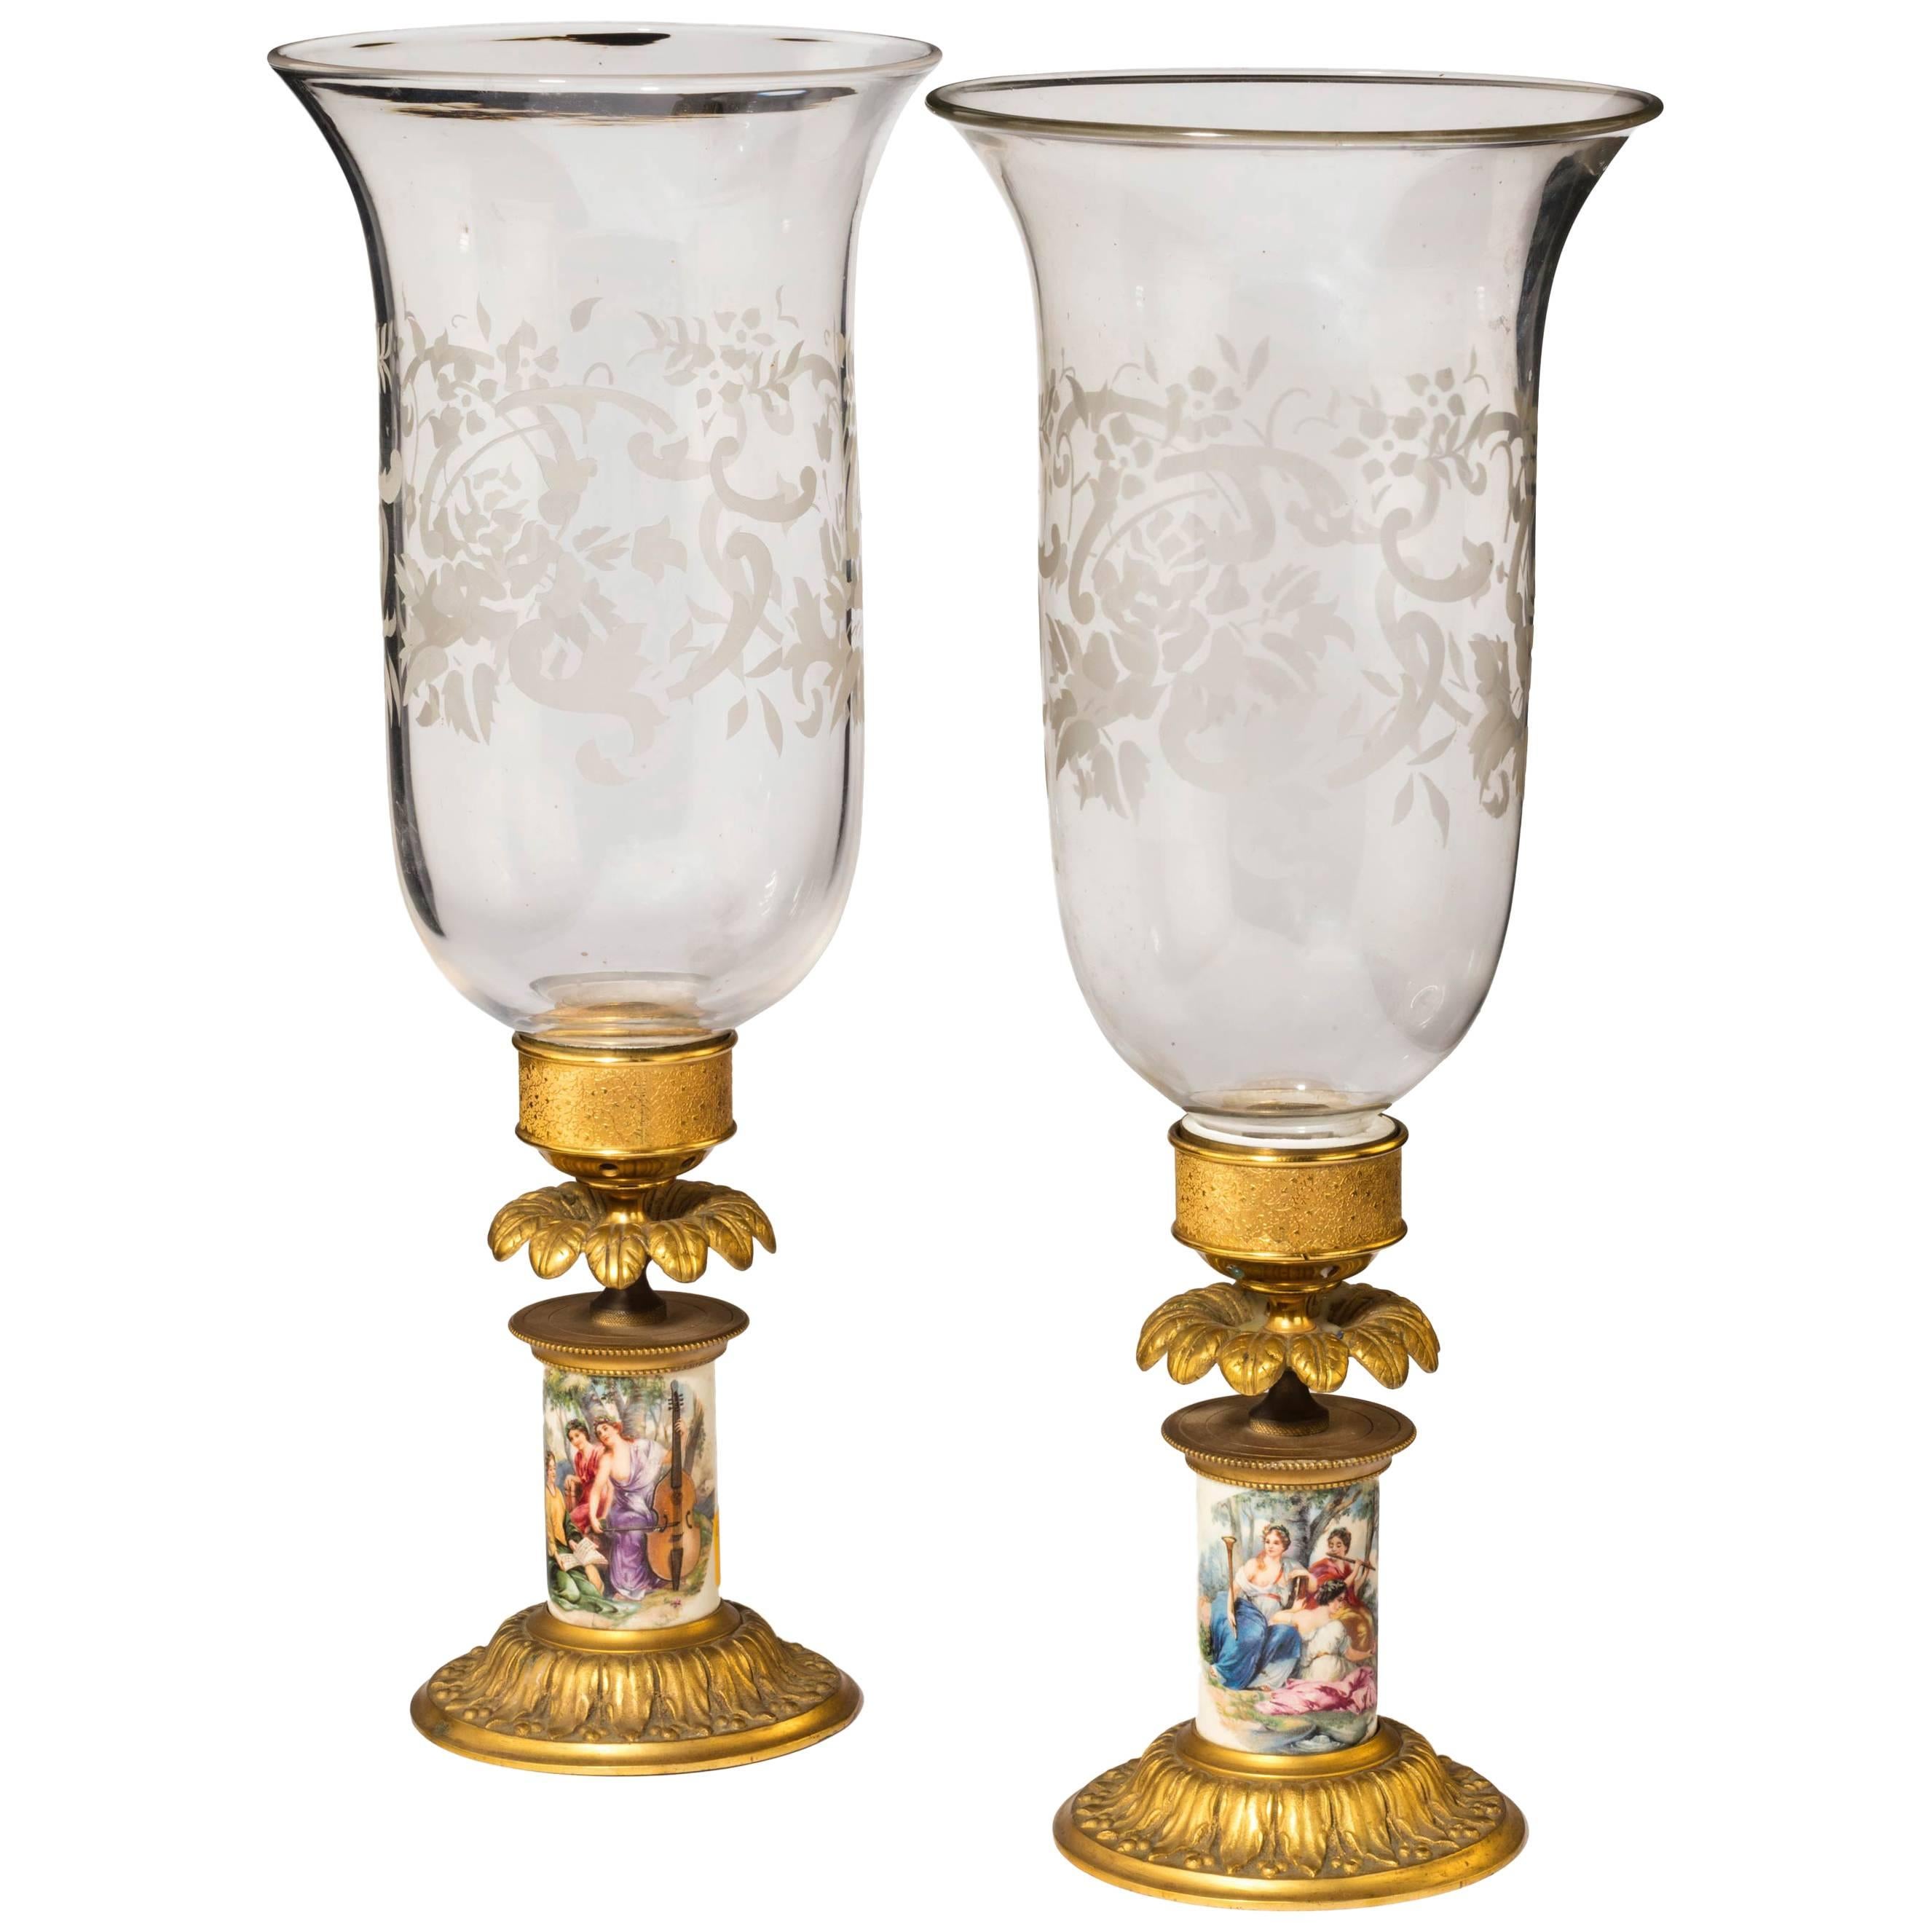 Pair of Late 19th Century Gilt Bronze Porcelain and Glass Storm Lanterns